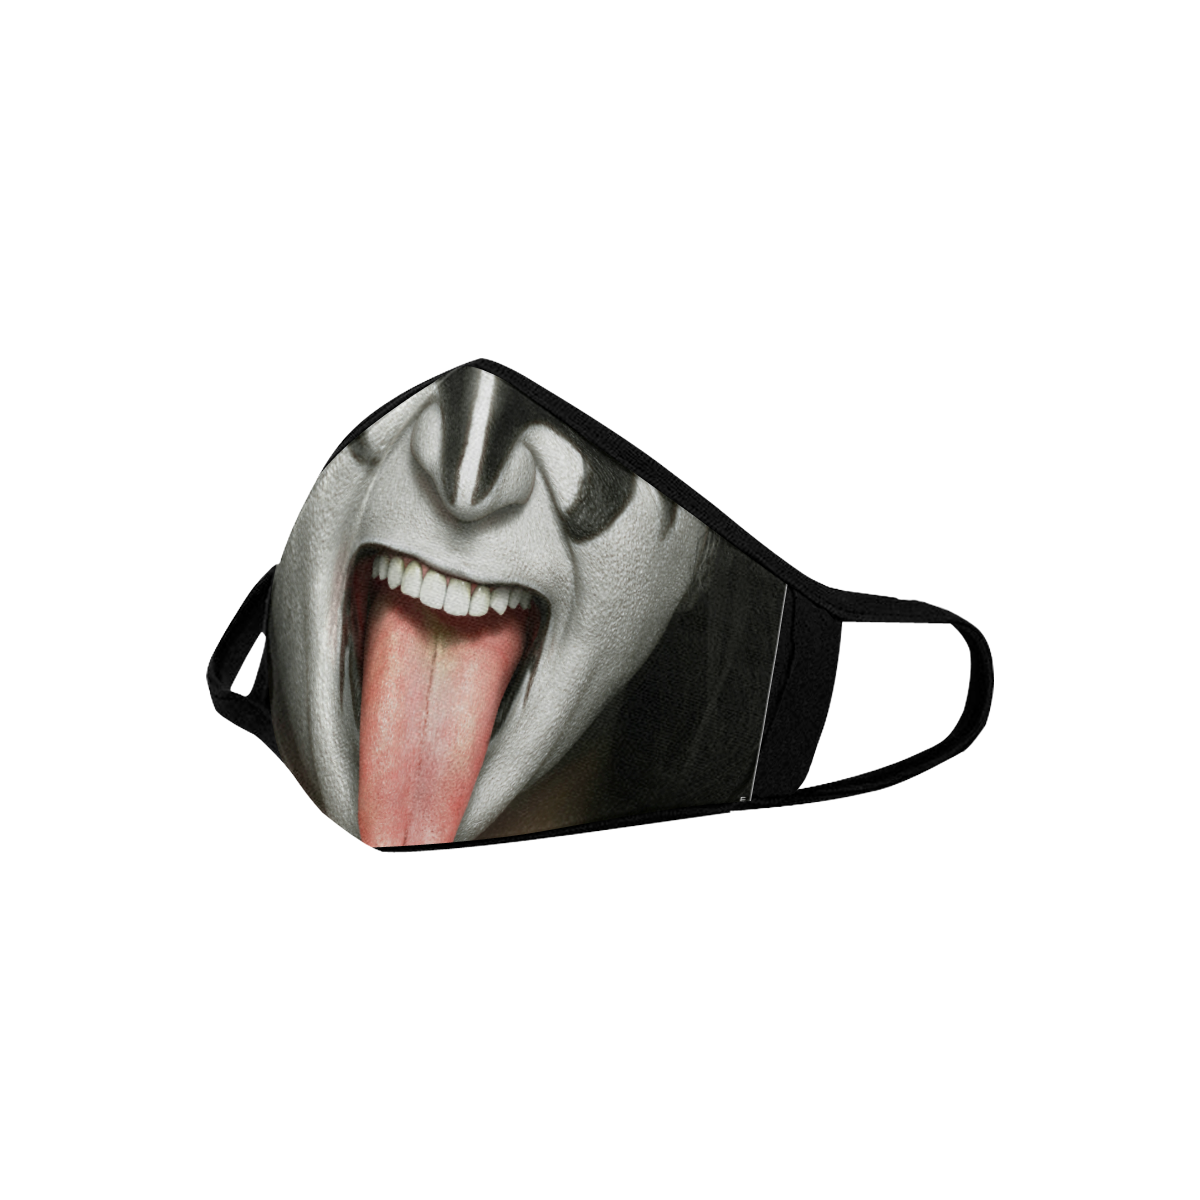 K.I.S.S. Simmons Mouth Mask